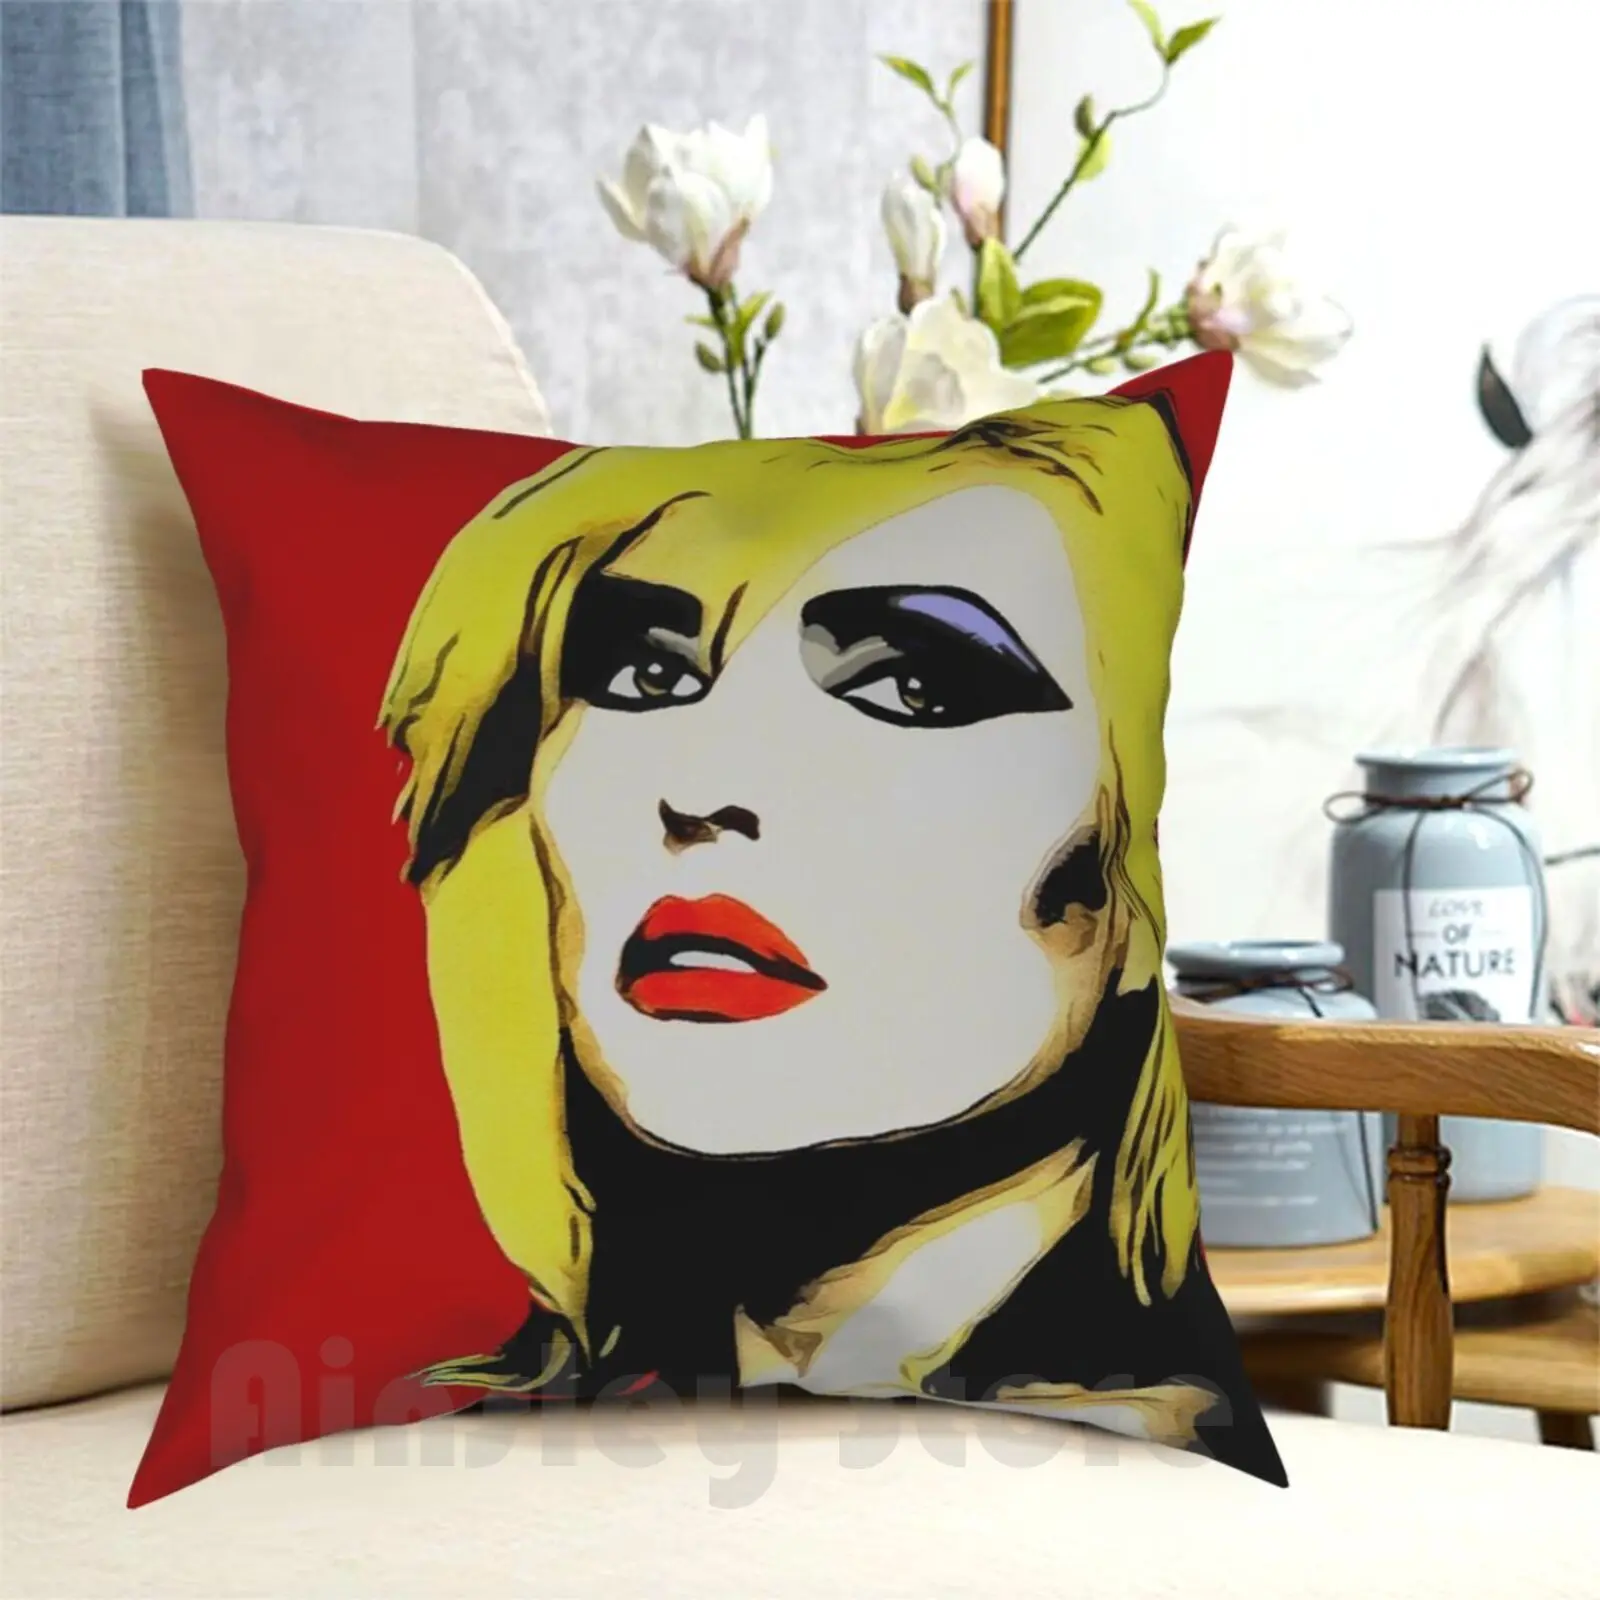 Debbie Pillow Case Printed Home Soft Throw Pillow Harry Debbie Harry Blondie Sweet And Low 1989 Remix New York City